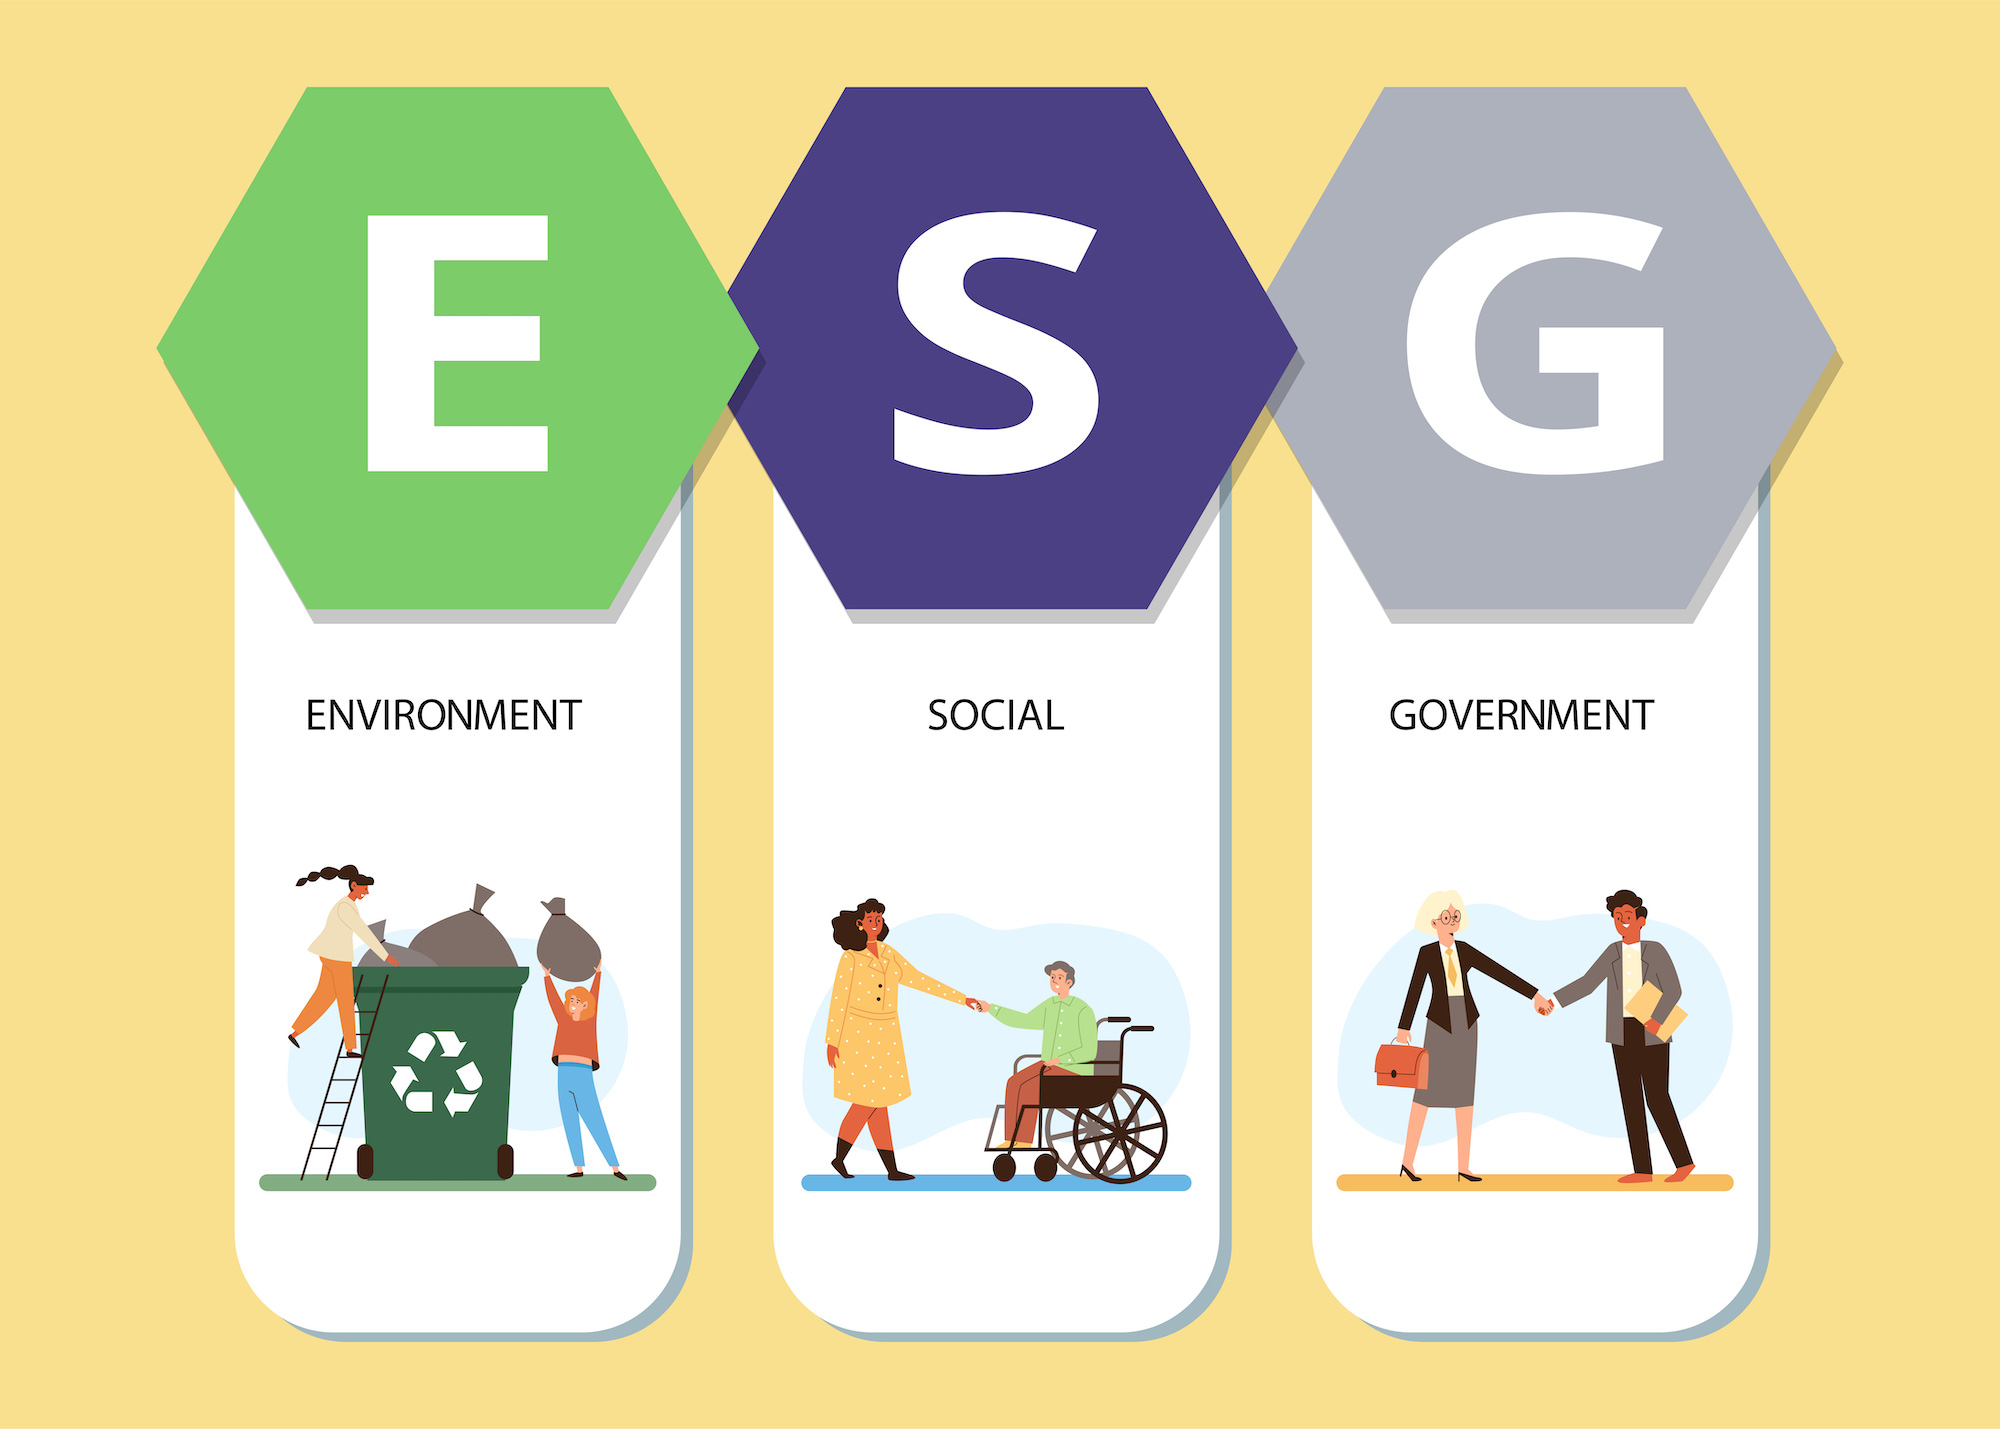 Graphic with ESG: Environmental, Social, Governance investing